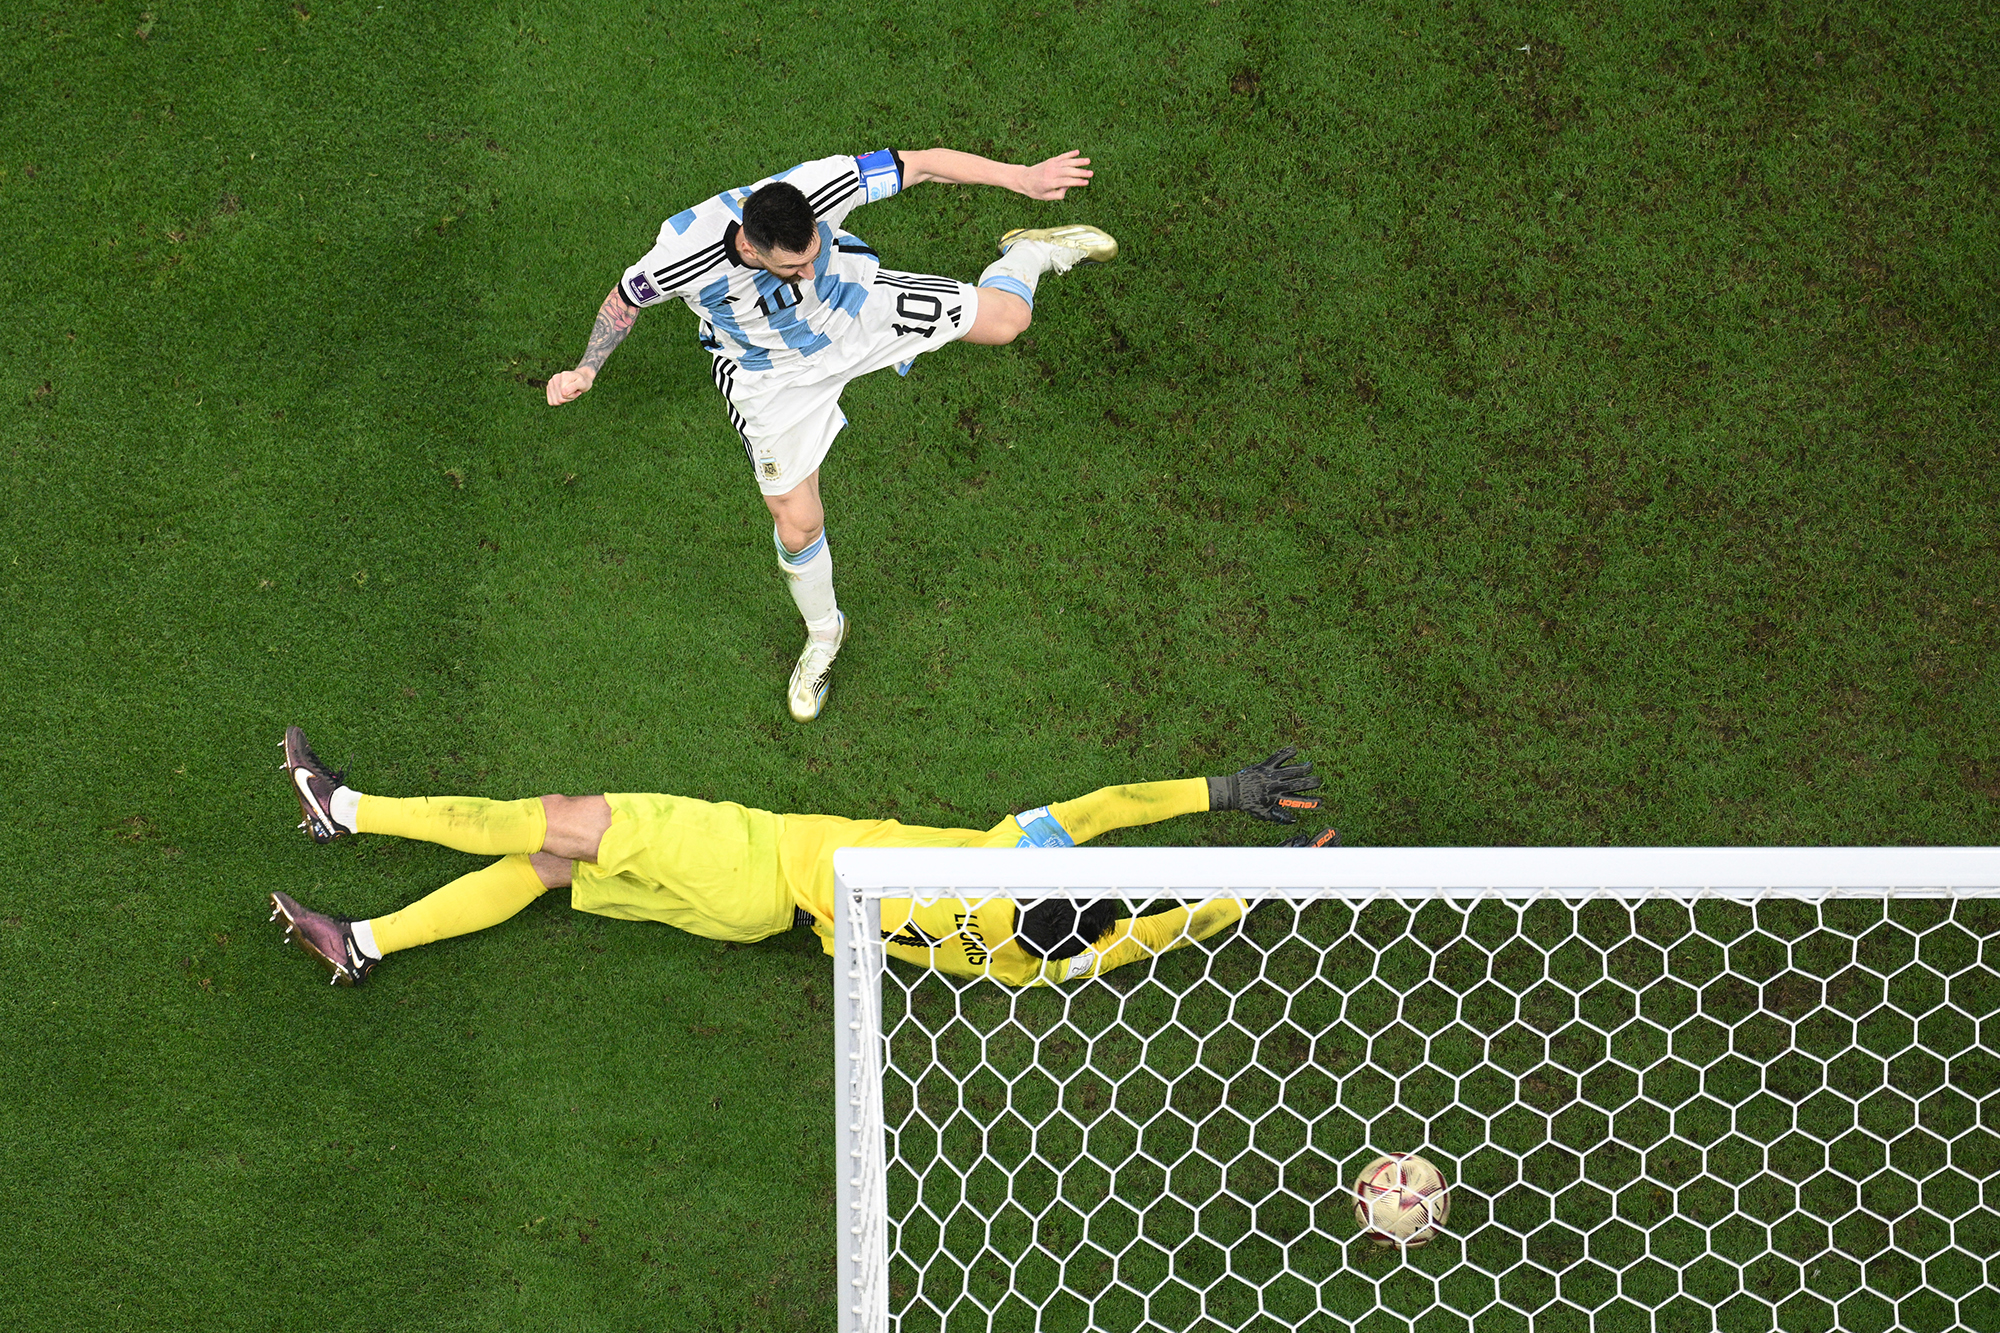 Messi puts Argentina back on top in extra time.